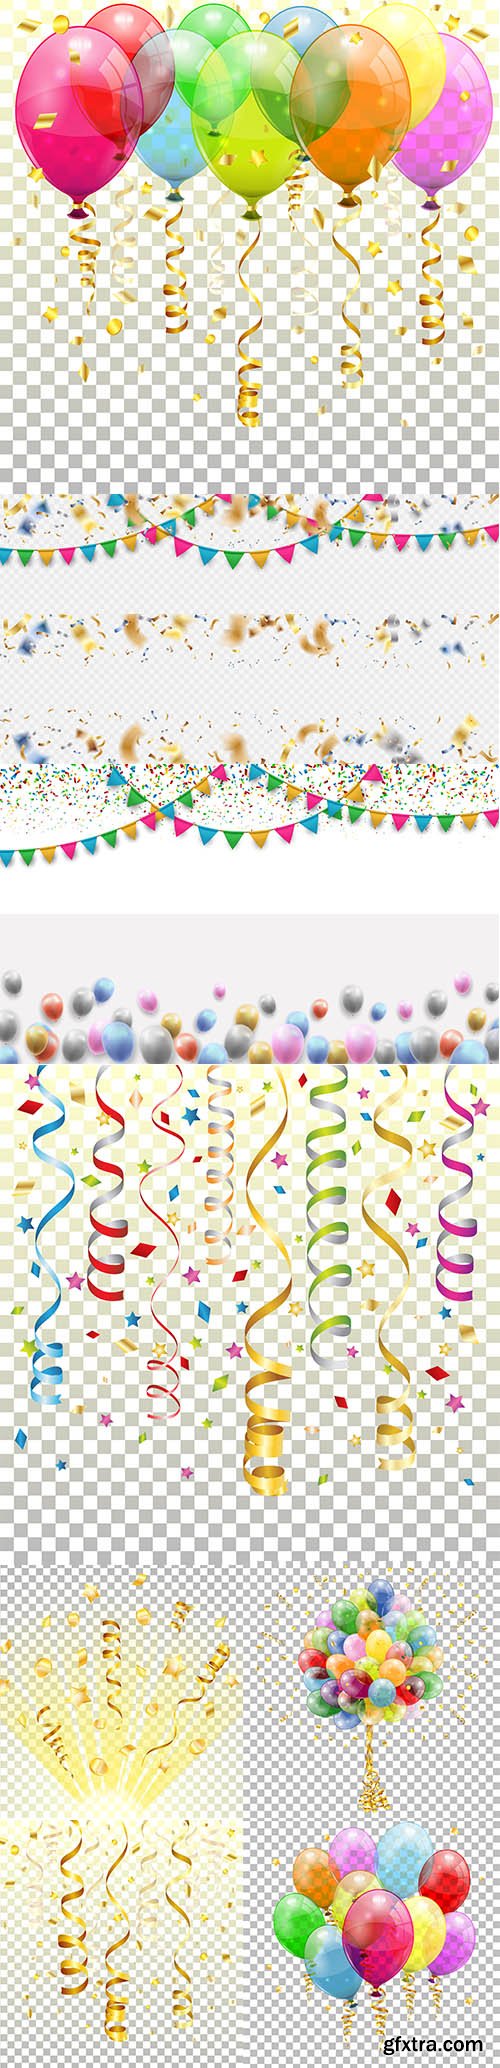 Birthday Background with Colorful Flags, Garlands, Confetti and Balloons